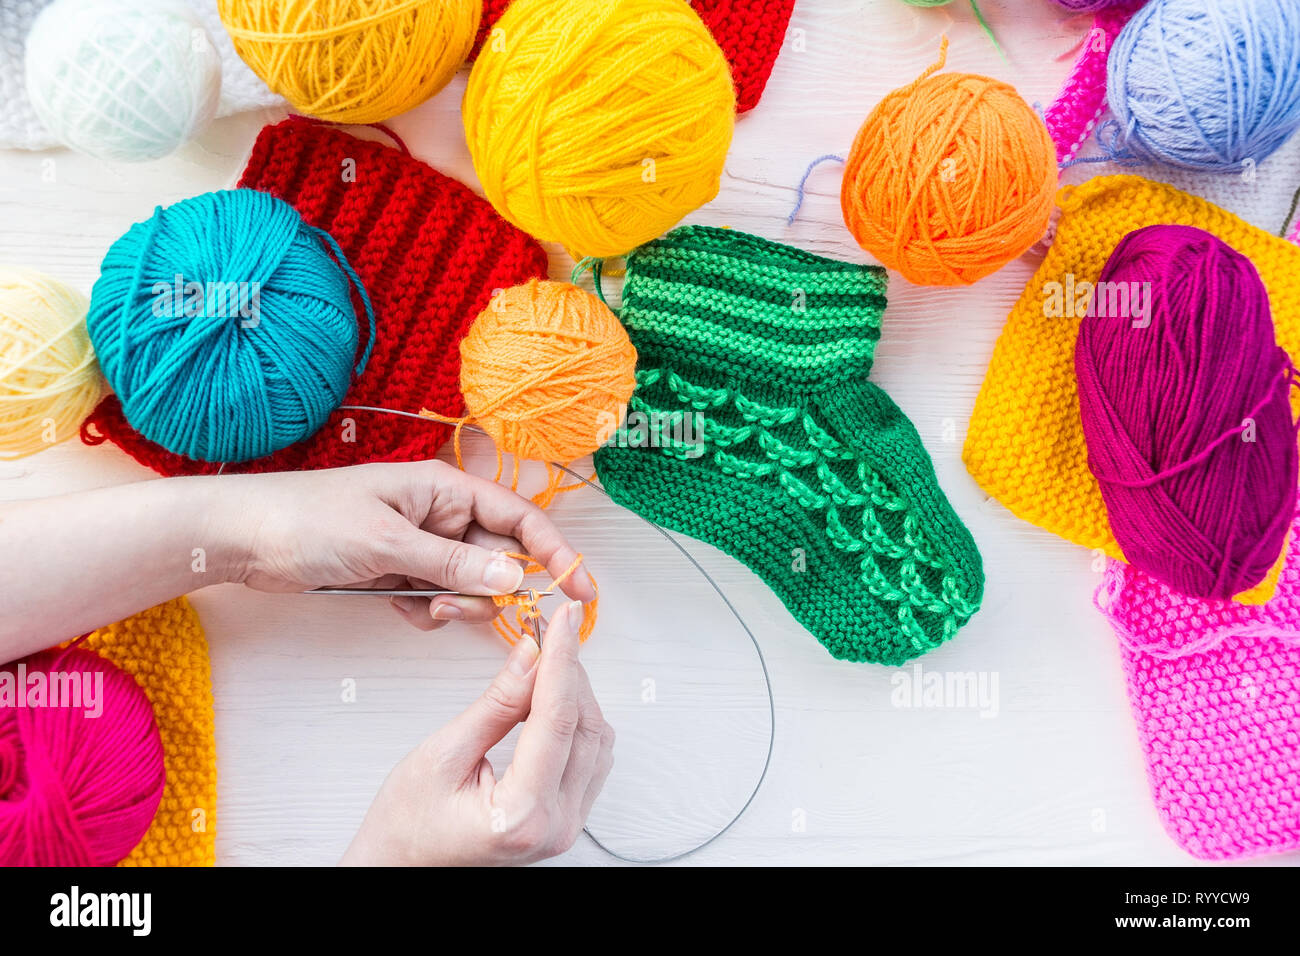 Woman's Hand Holds Large Knitting Needles Knitted Yarn Large Skein Stock  Photo by ©dalivl@yandex.ru 396078754